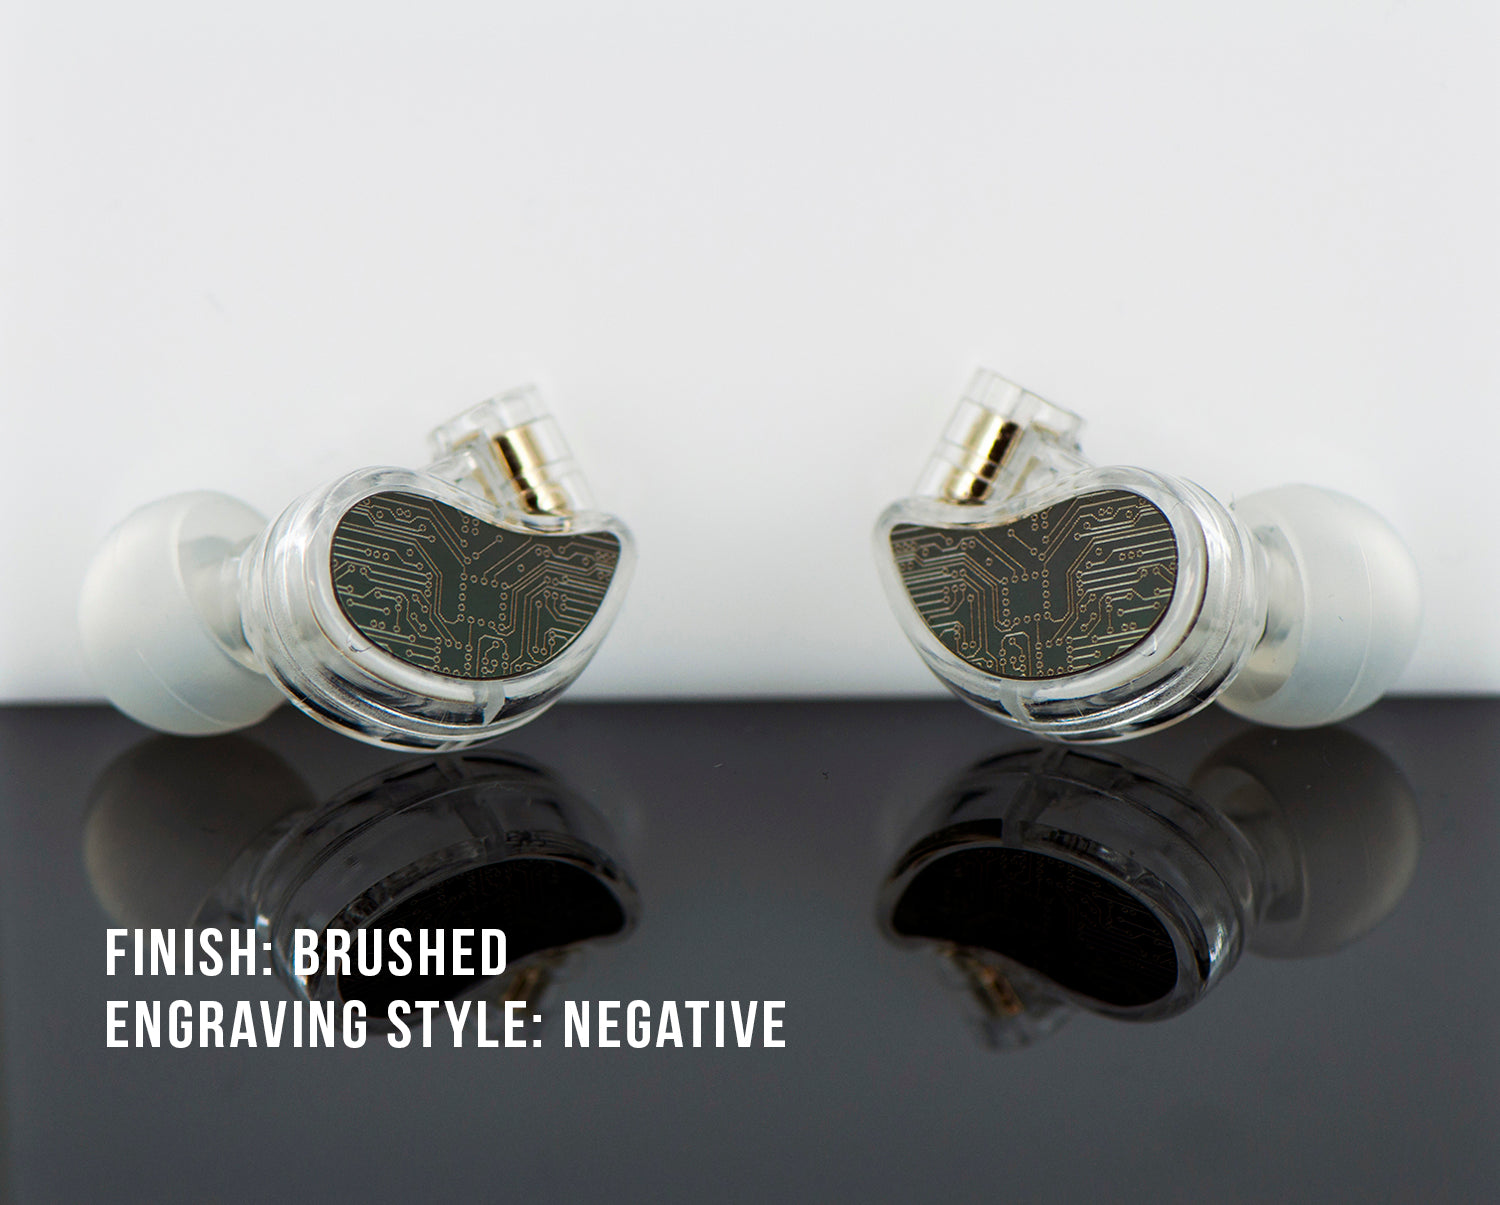 Two high-end in-ear monitors with brushed finishes and negative engraving styles of circuit patterns, displayed atop a reflective surface against a white background.